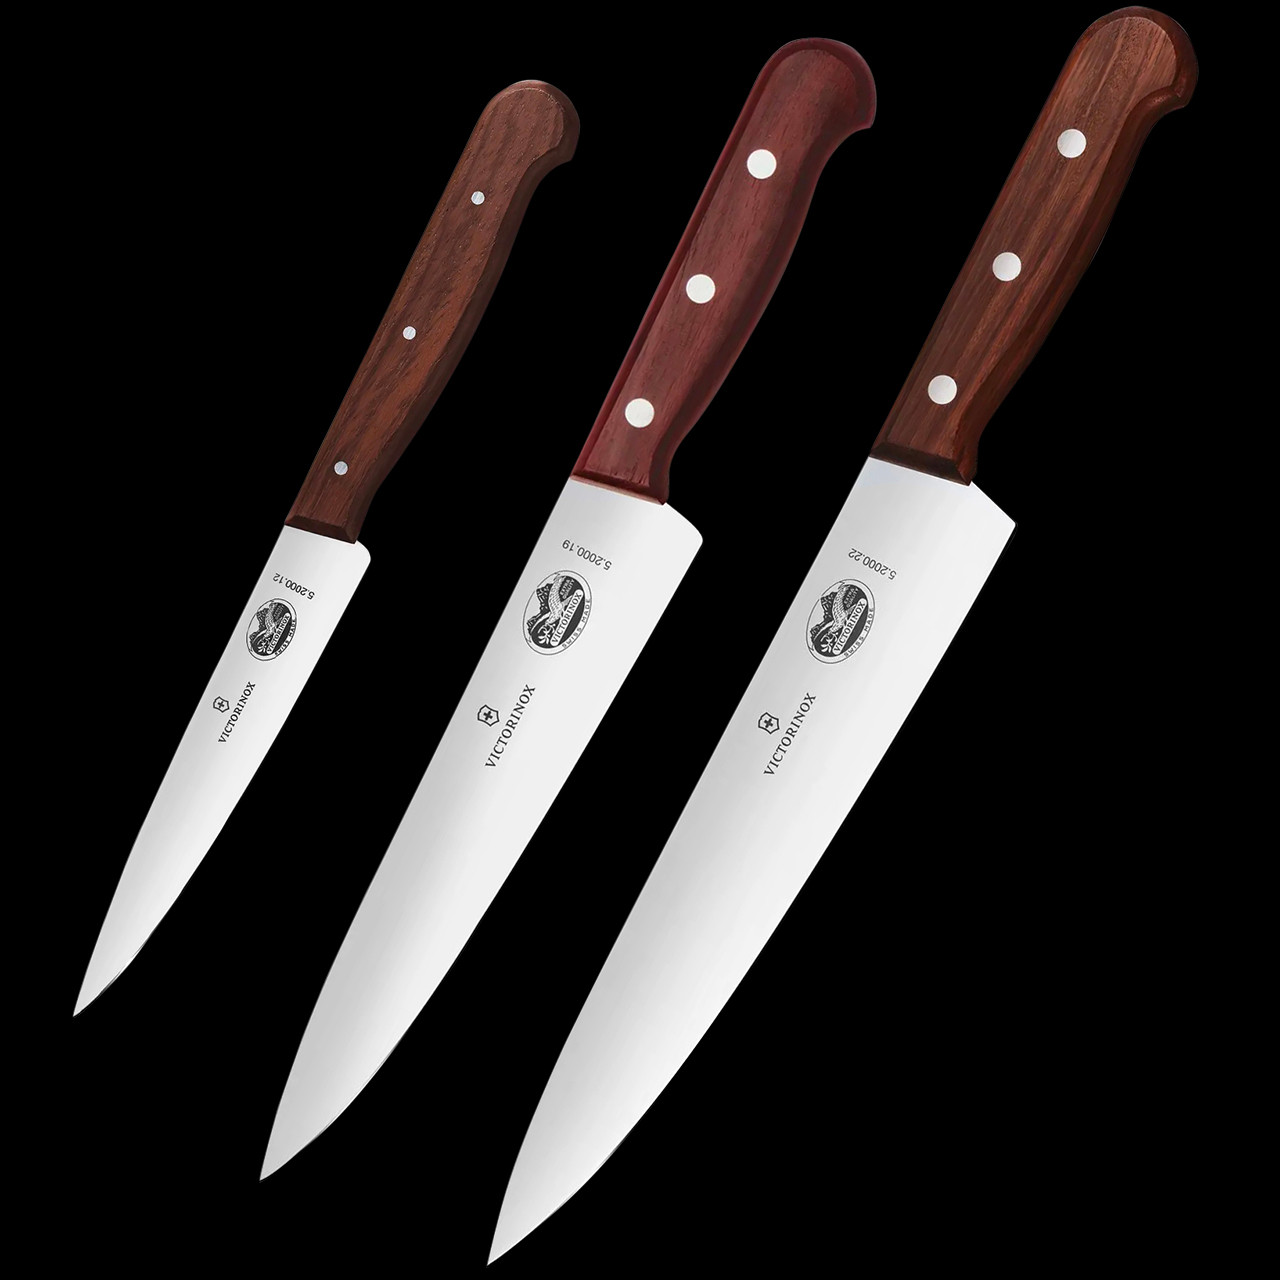 Victorinox 3 piece kitchen knive set with maple wood handle